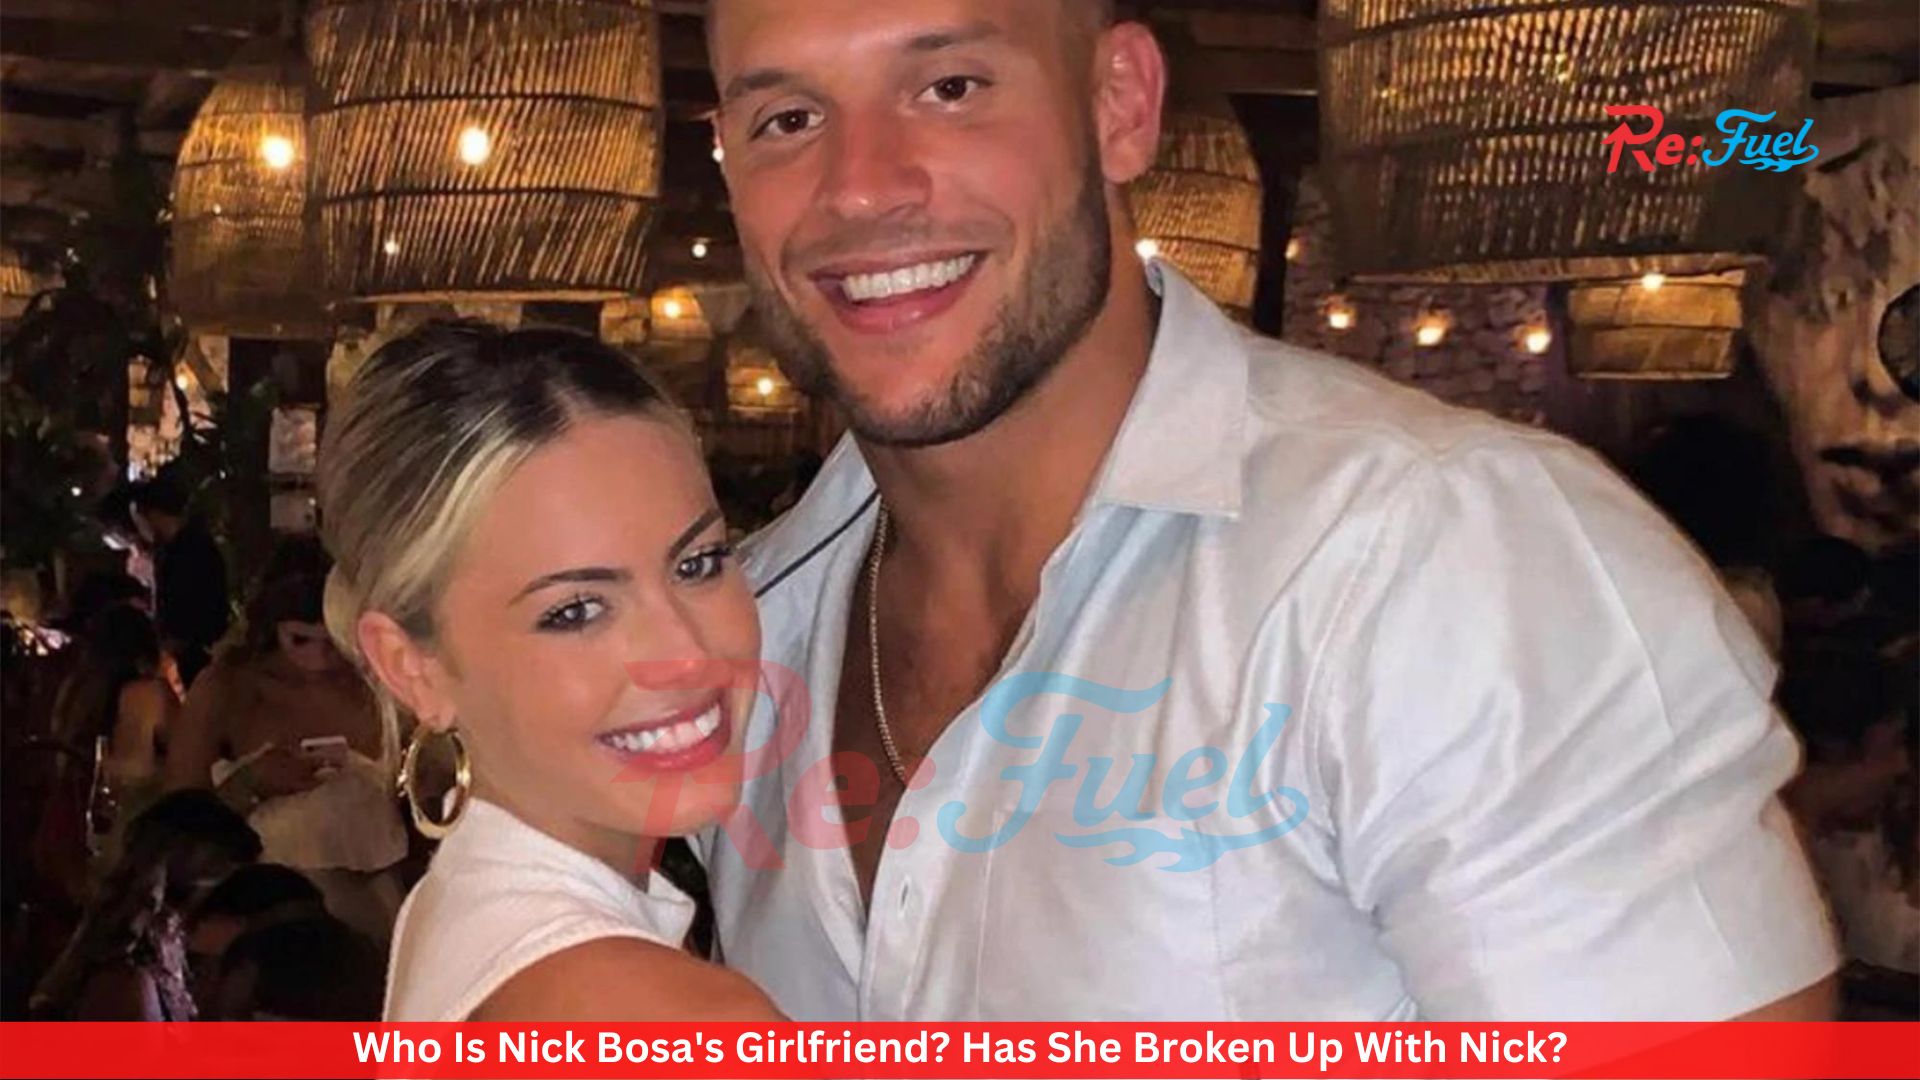 Who Is Nick Bosa's Girlfriend? Has She Broken Up With Nick?